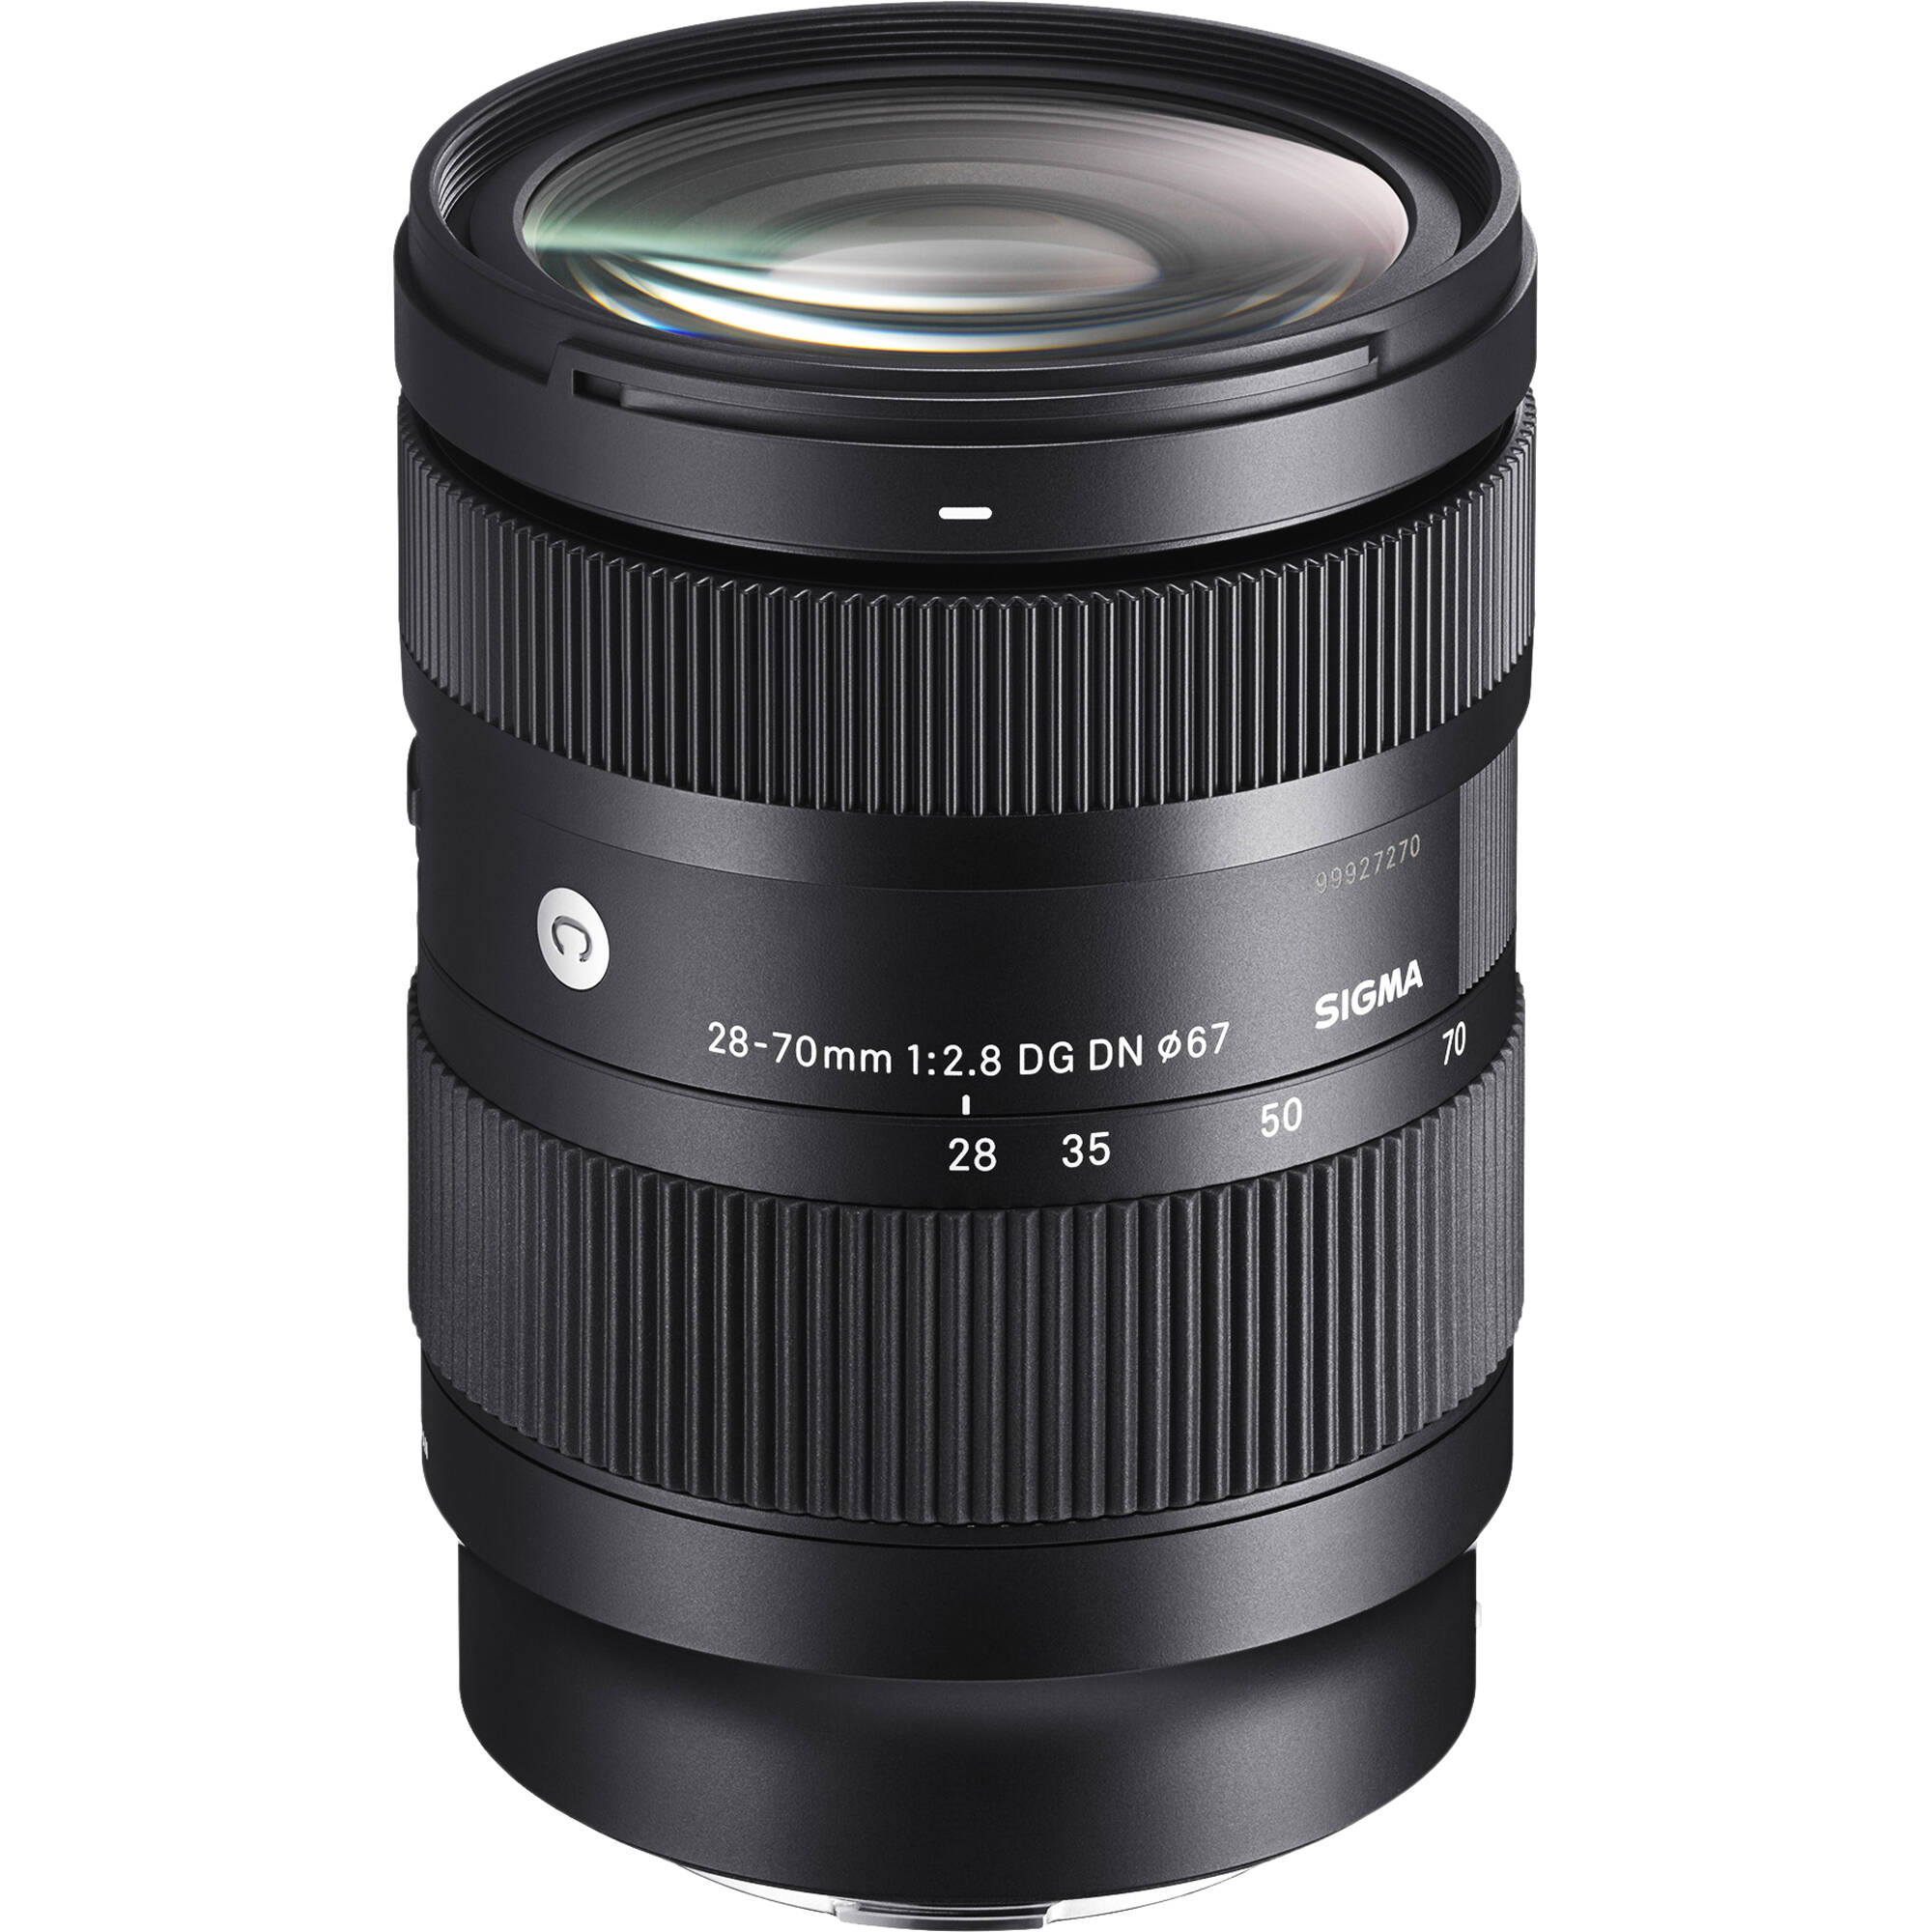 TThumbnail image for Sigma 28-70mm F2.8 DG DN Contemporary Sony FE mount